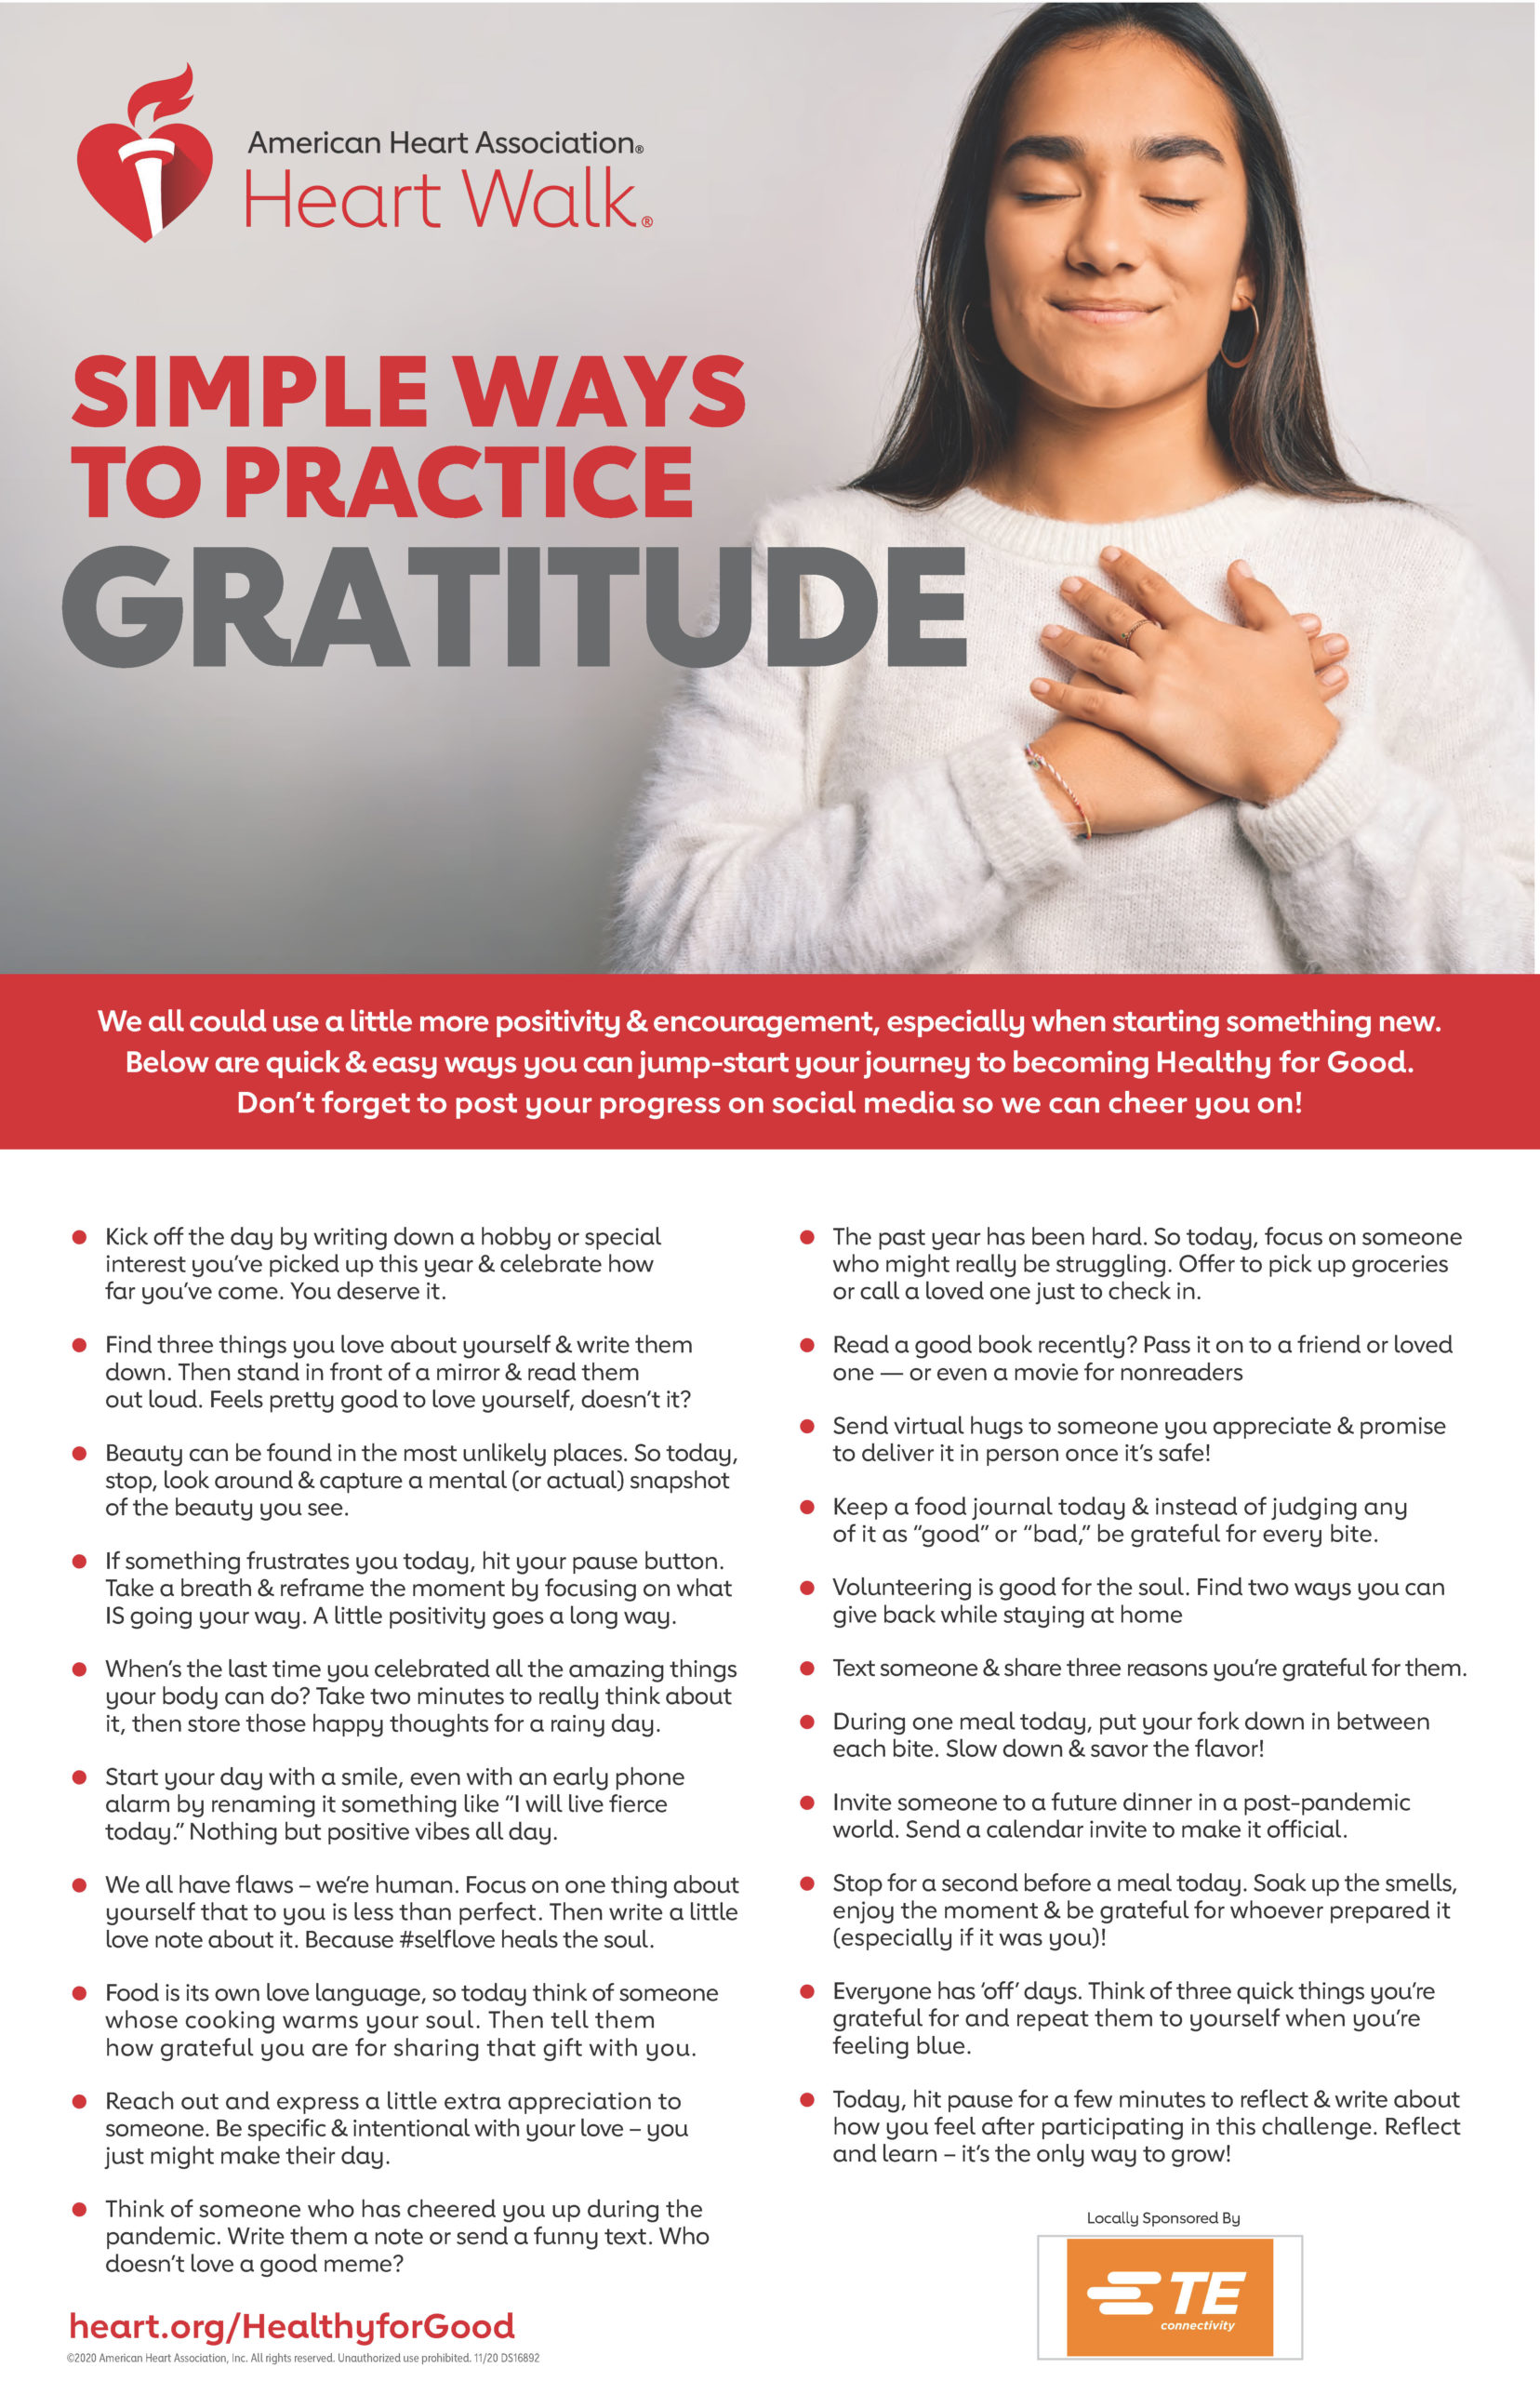 Live Fierce and Be Well with our 21 Days of Gratitude Challenge